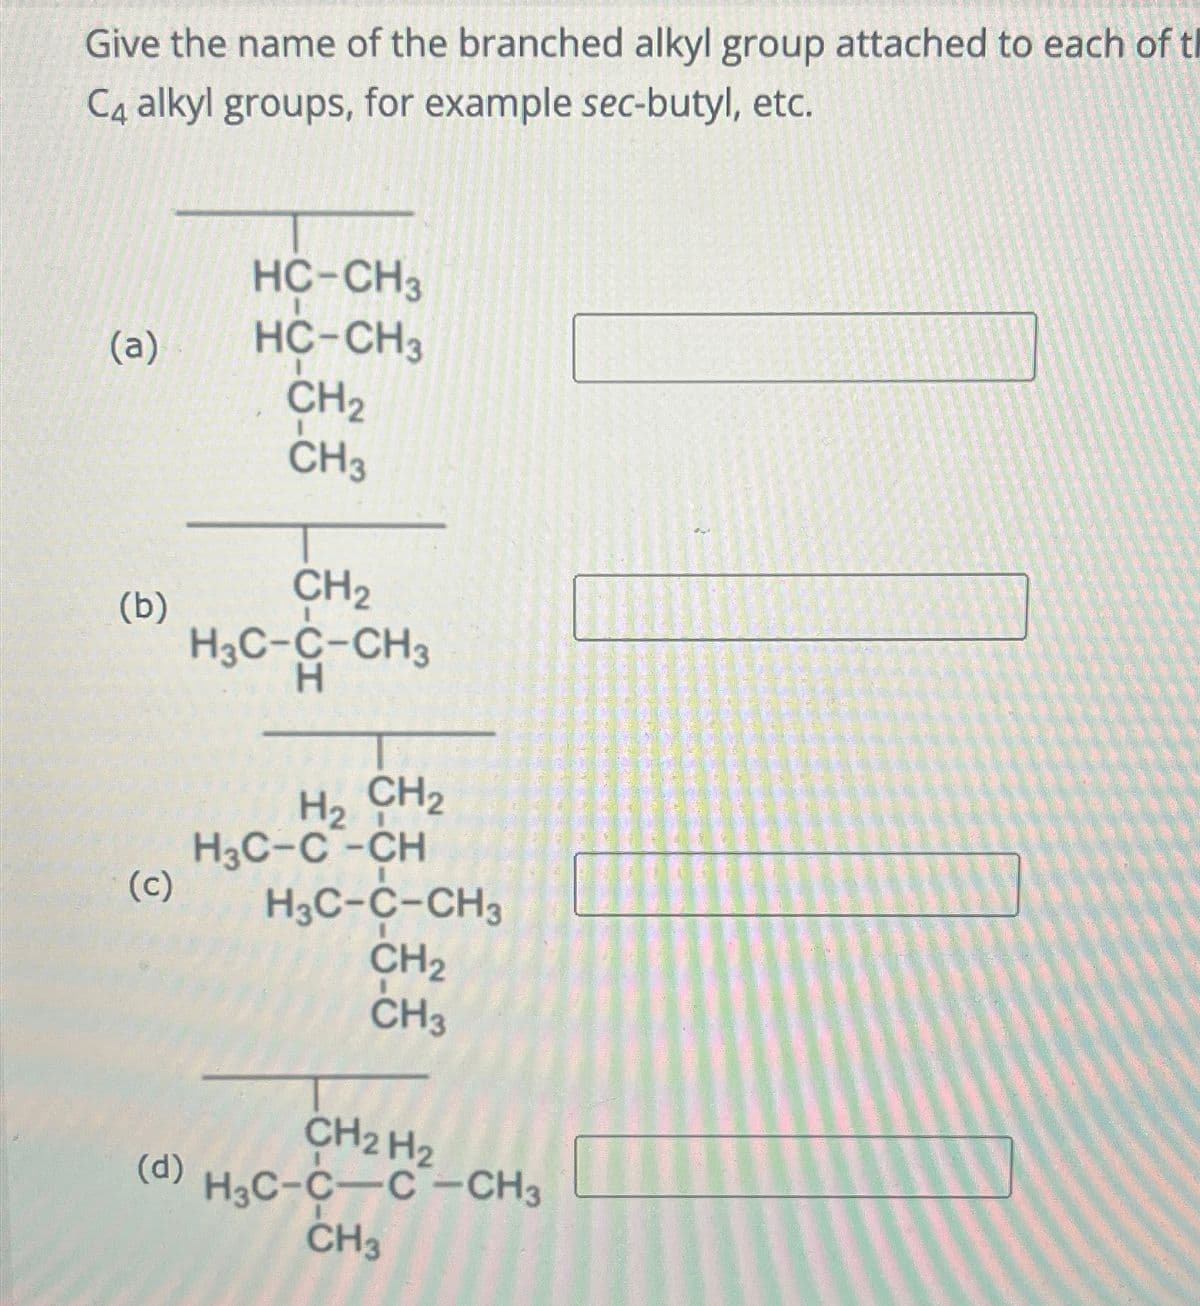 Give the name of the branched alkyl group attached to each of t
C4 alkyl groups, for example sec-butyl, etc.
HC-CH3
(a)
HC-CH3
CH2
(b)
(၁)
CH3
CH2
H3C-C-CH3
H
CH2
H₂
H3C-C-CH
H3C-C-CH3
CH2
CH3
CH2 H2
(d)
H3C-C-C-CH3
CH3